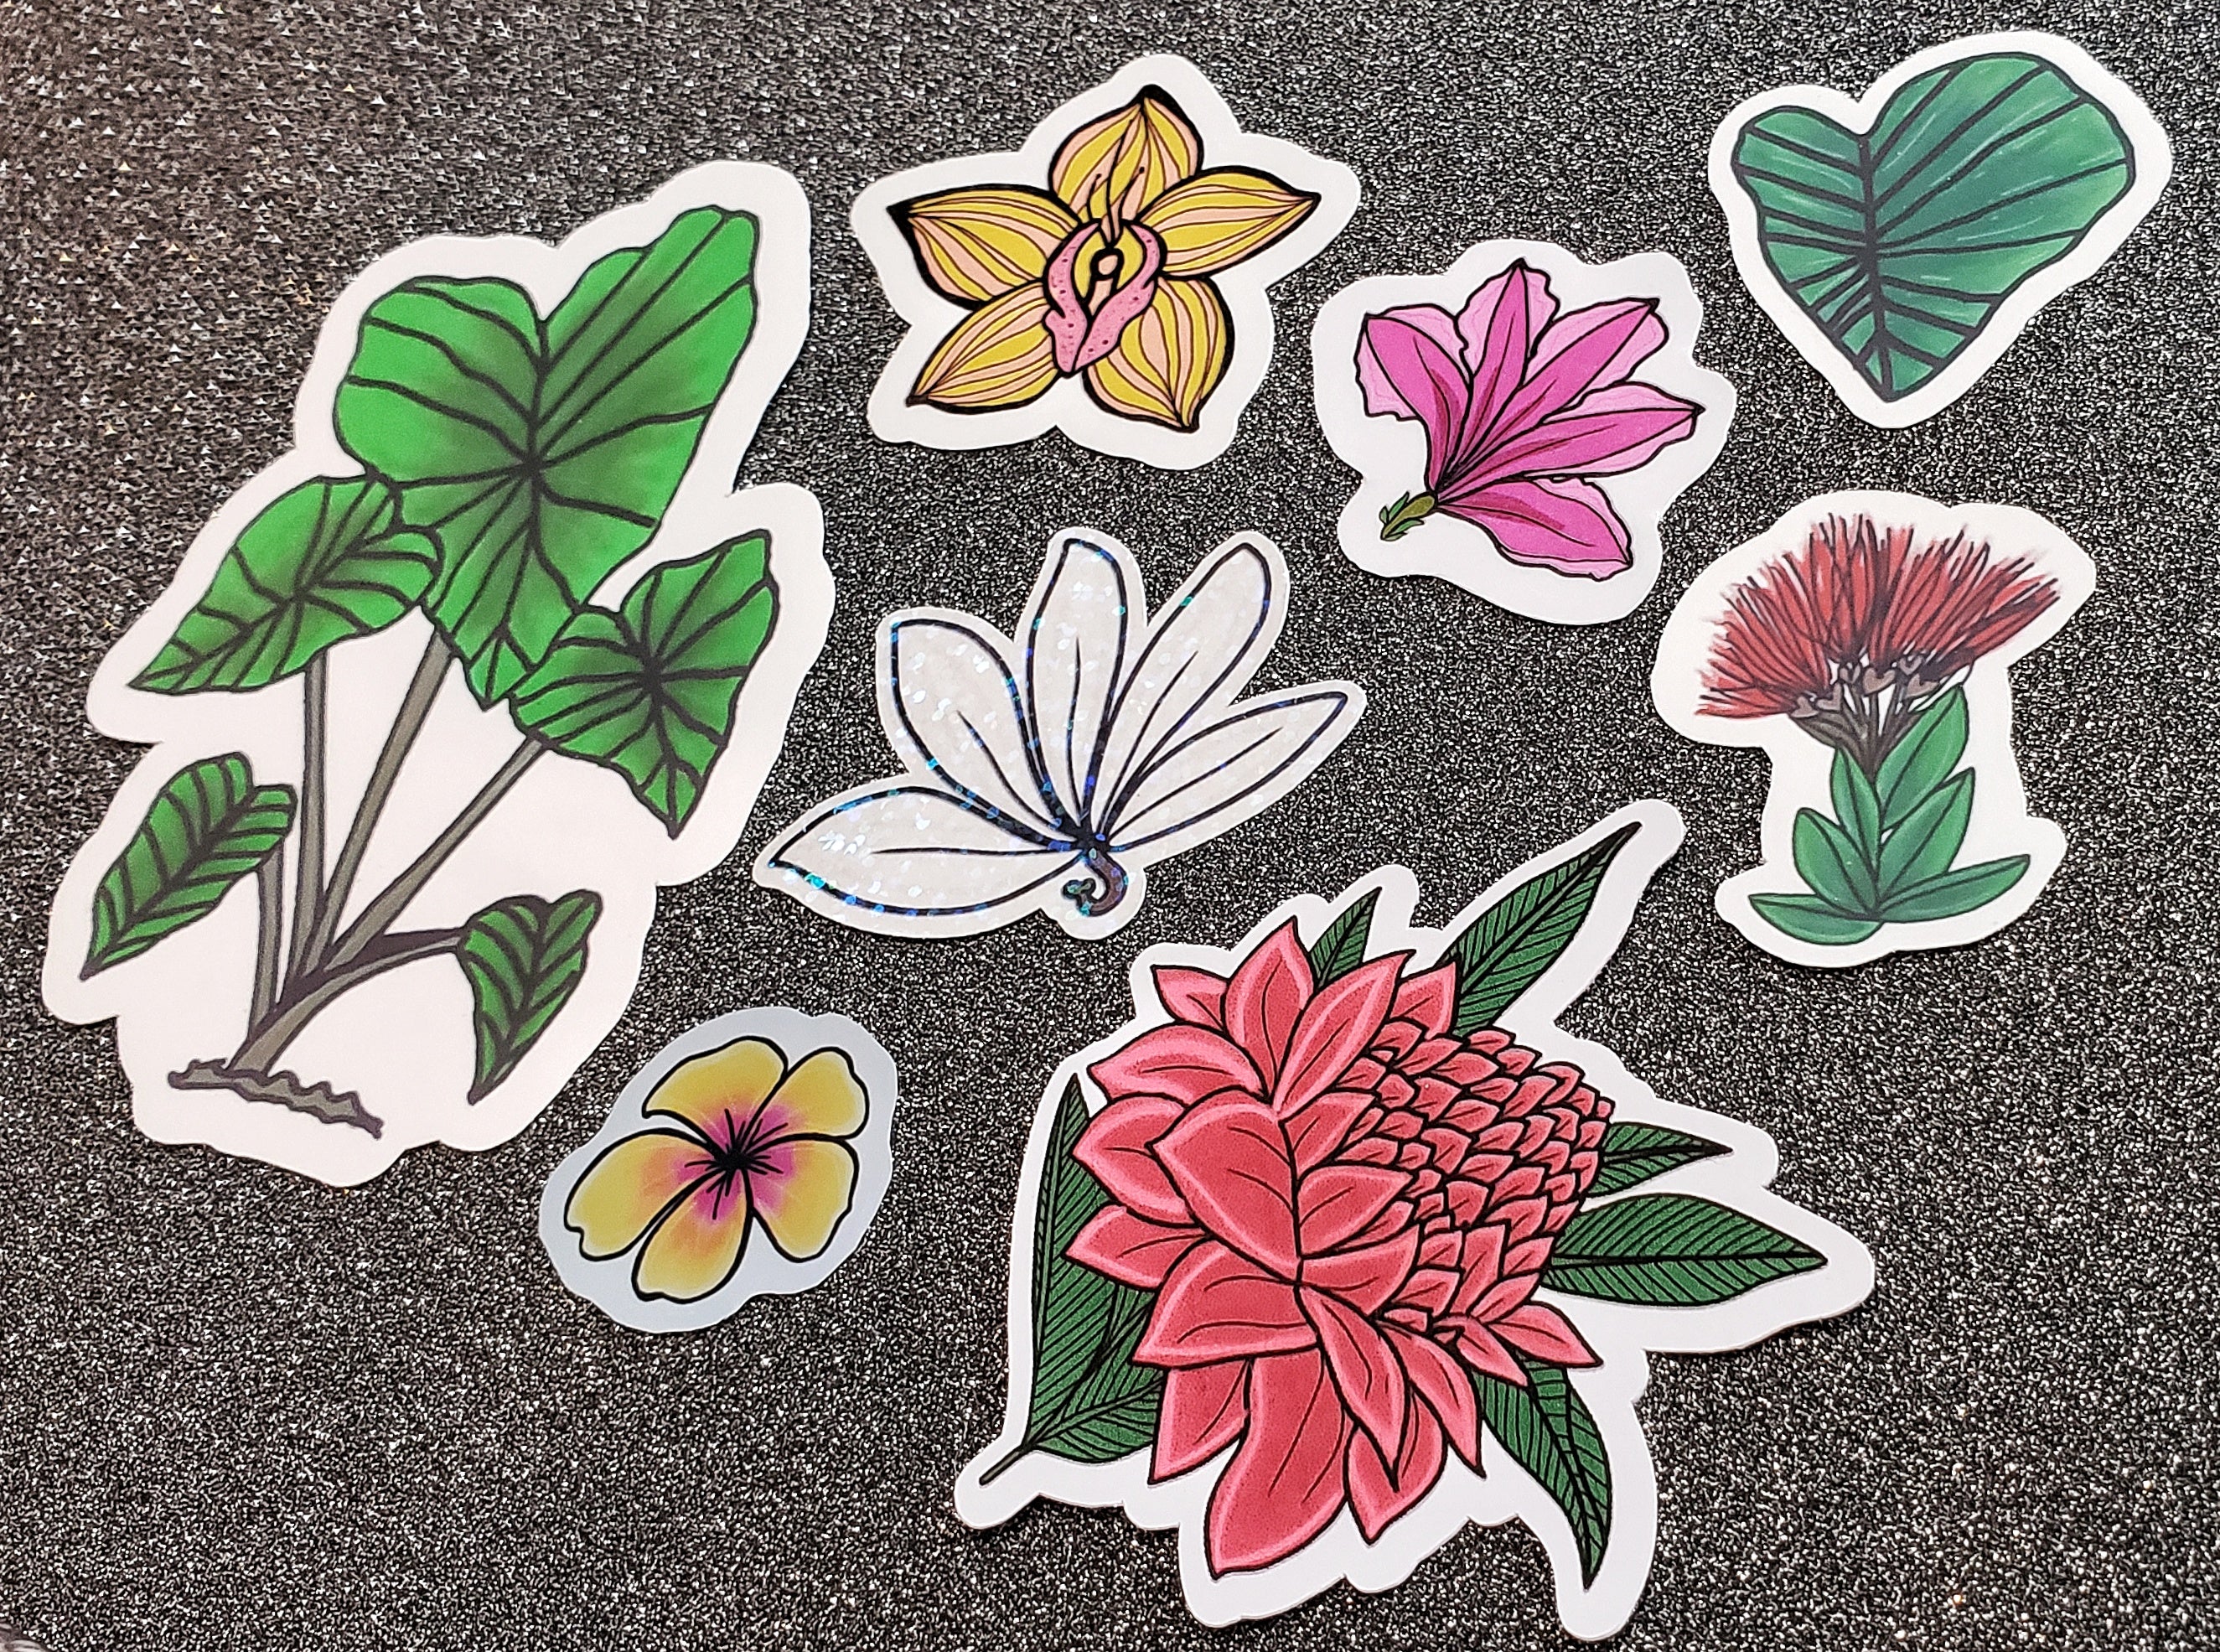 Hawaiian Tropical Flowers and Kalo Sticker Pack